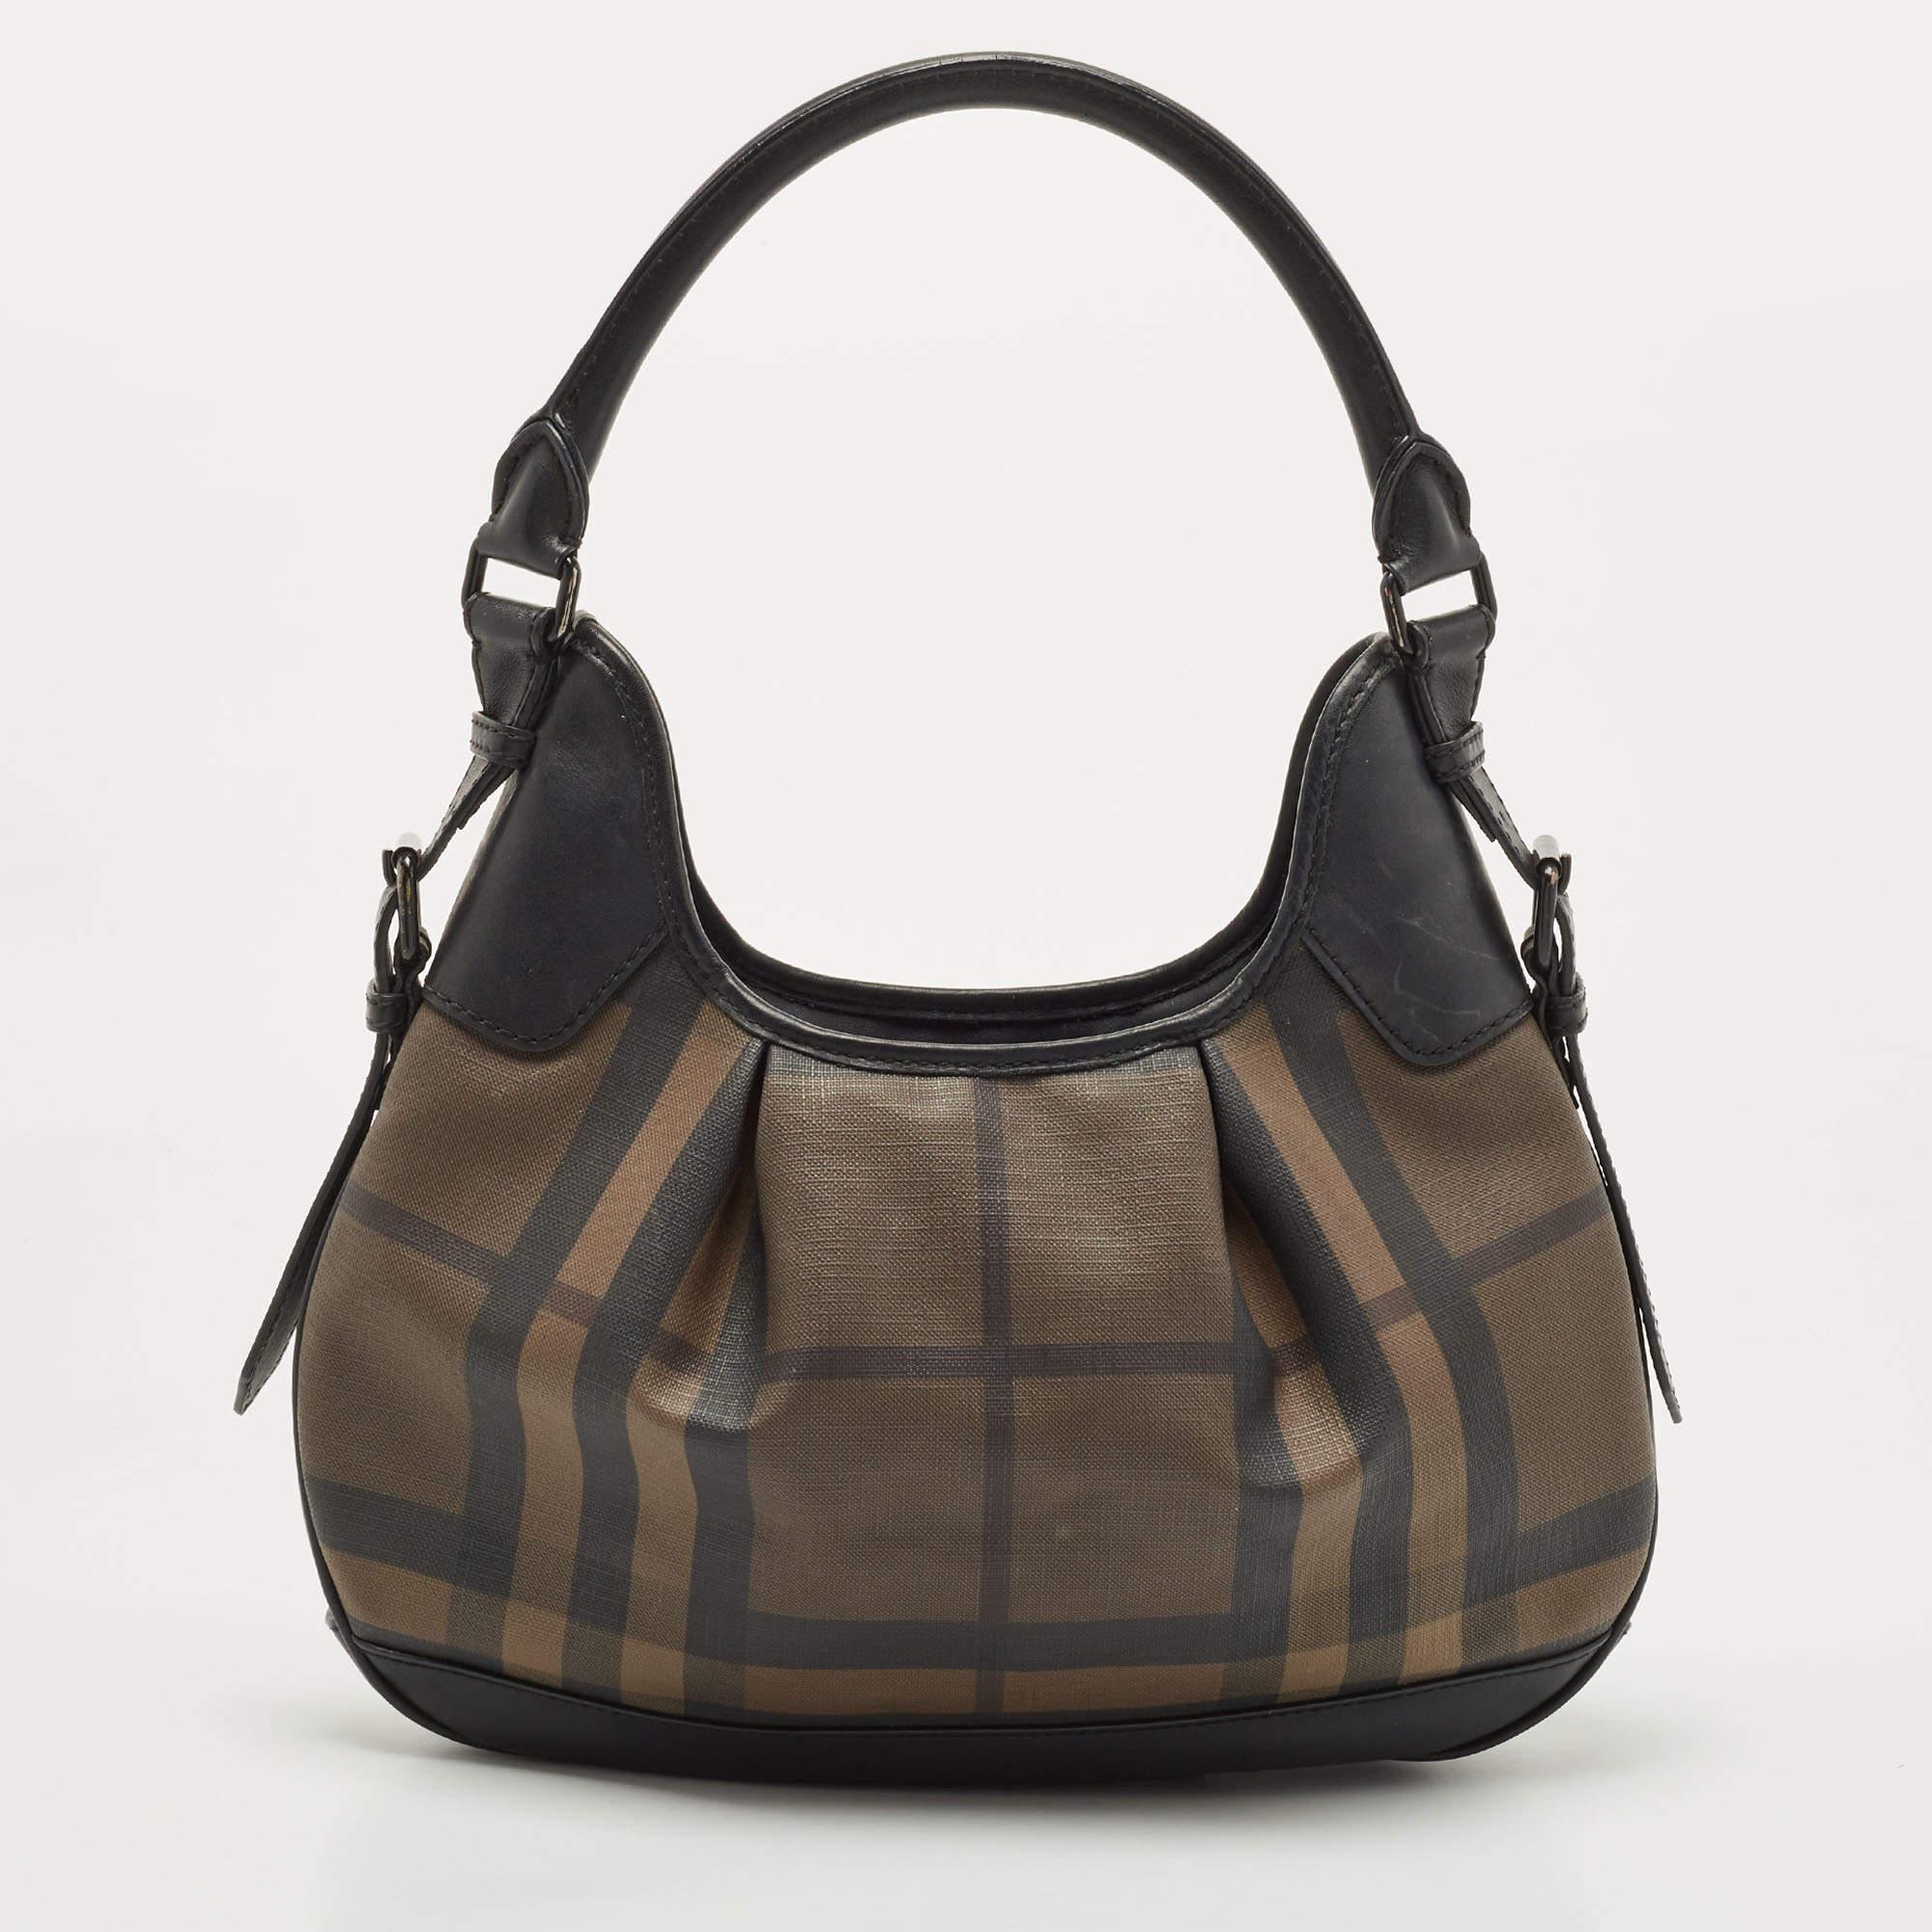 Spacious and captivating, this Brooklyn hobo is from the House of Burberry. It has been crafted from House Check PVC and leather on the exterior. It features two handles, black-tone hardware, and a canvas-lined interior. Make this hobo yours today!

